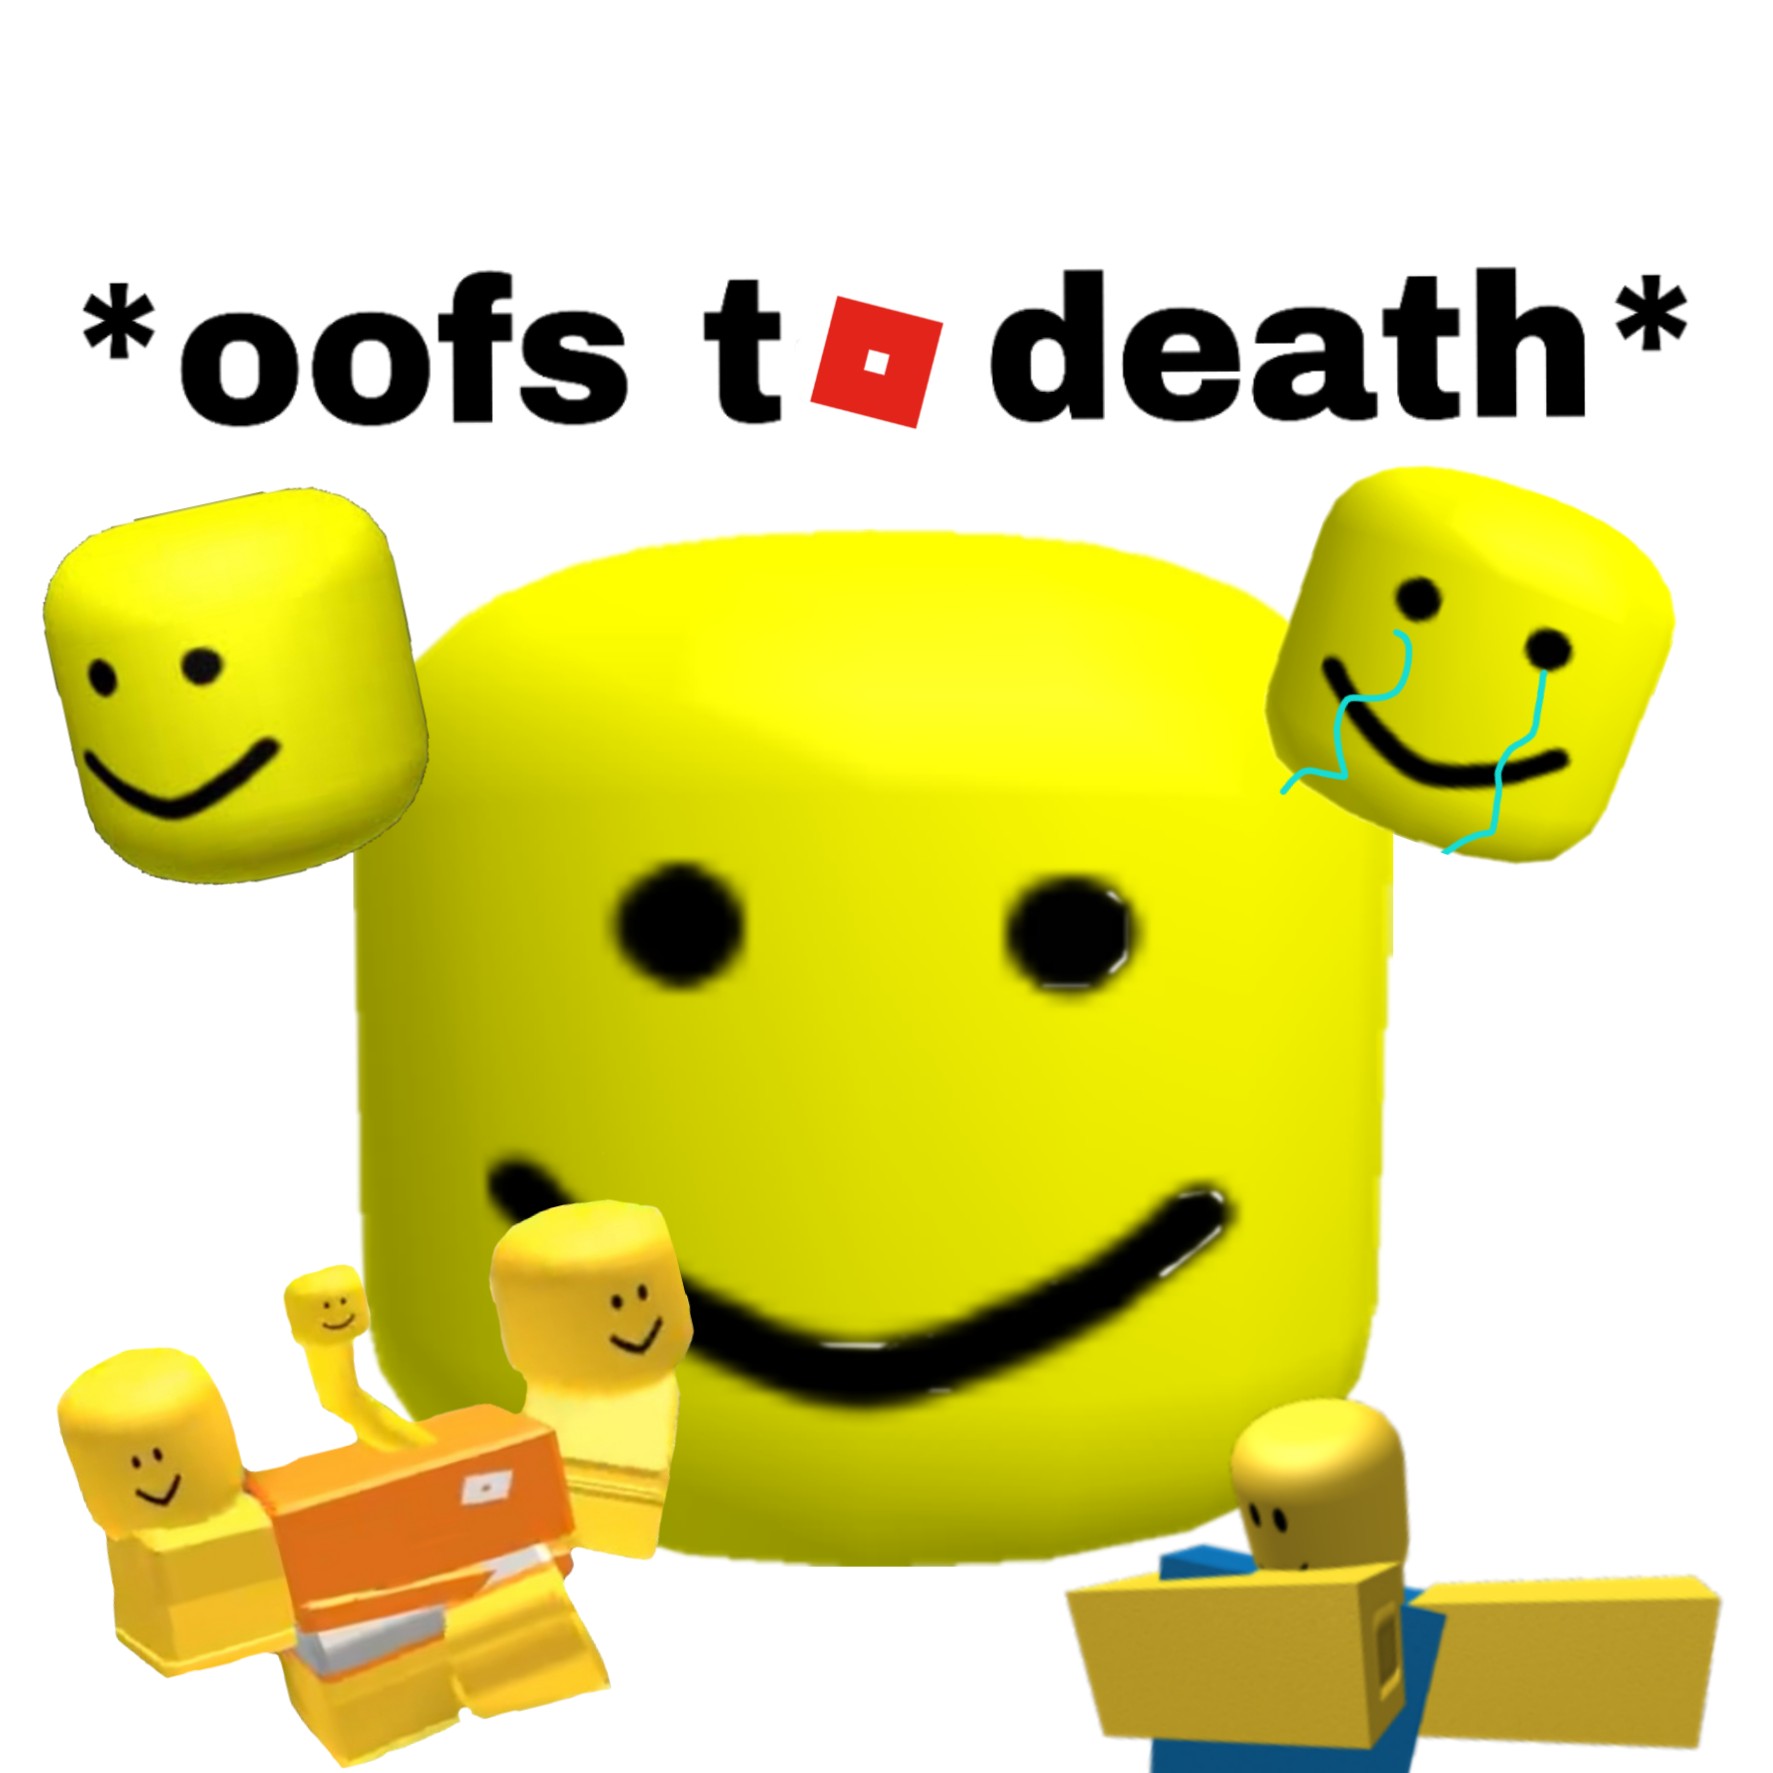 Freetoedit Oof Roblox Robloxoof Oooooooooooooof Robloxd - freetoedit oof roblox robloxoof oooooooooooooof robloxdeath robloxdeathsound yeet